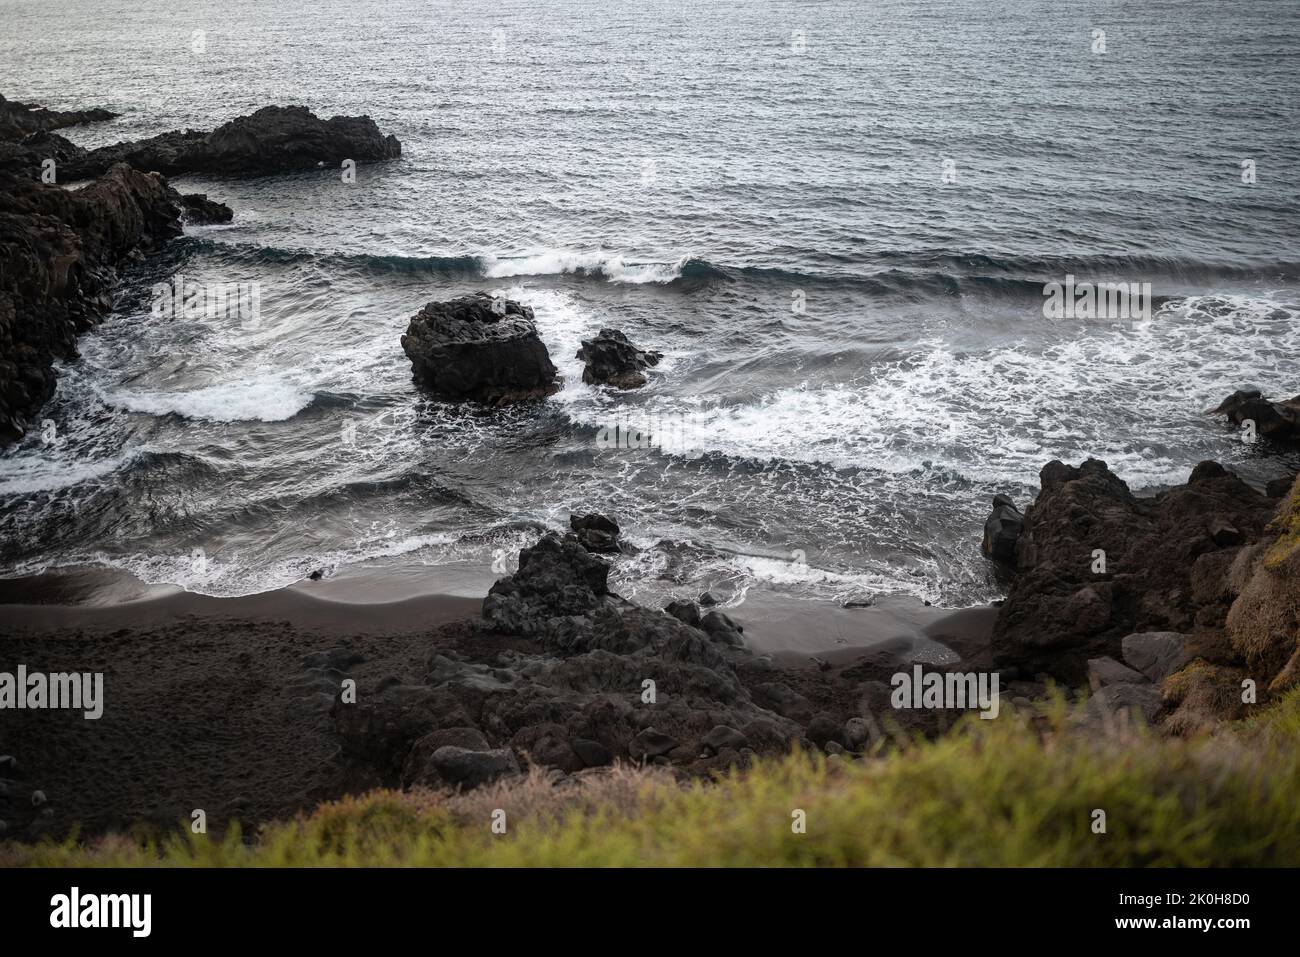 Black sand beach with volcanic rocks and some grass. Dramatic landscape Stock Photo